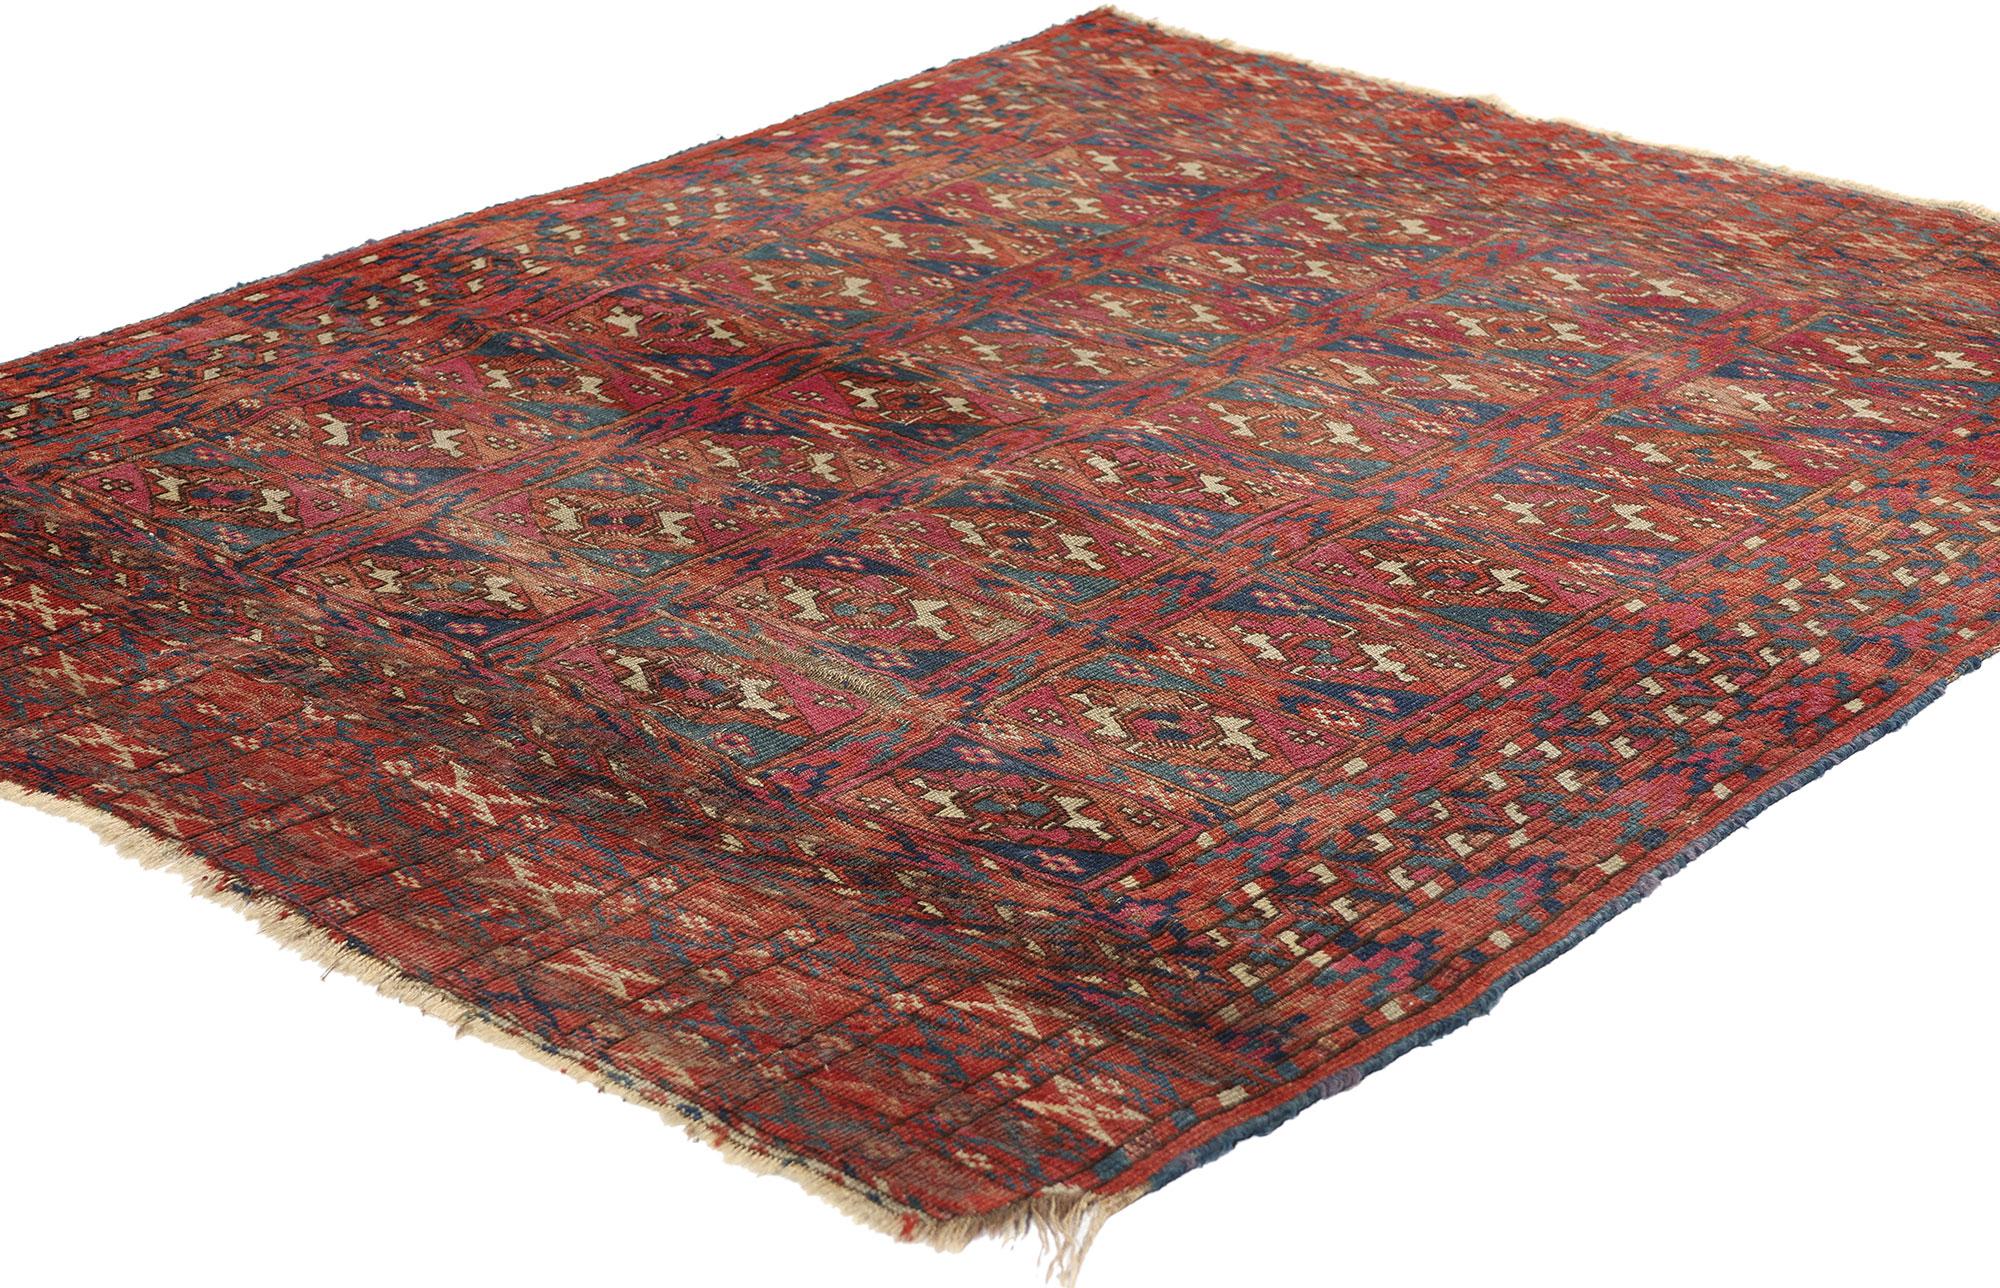 78778 Antique Turkoman Tekke Rug, 03'06 x 04'03. Turkoman Tekke rugs from Turkestan are handwoven carpets crafted by the Tekke tribe, one of the major Turkmen tribes historically located in the region of Turkestan, which encompasses parts of